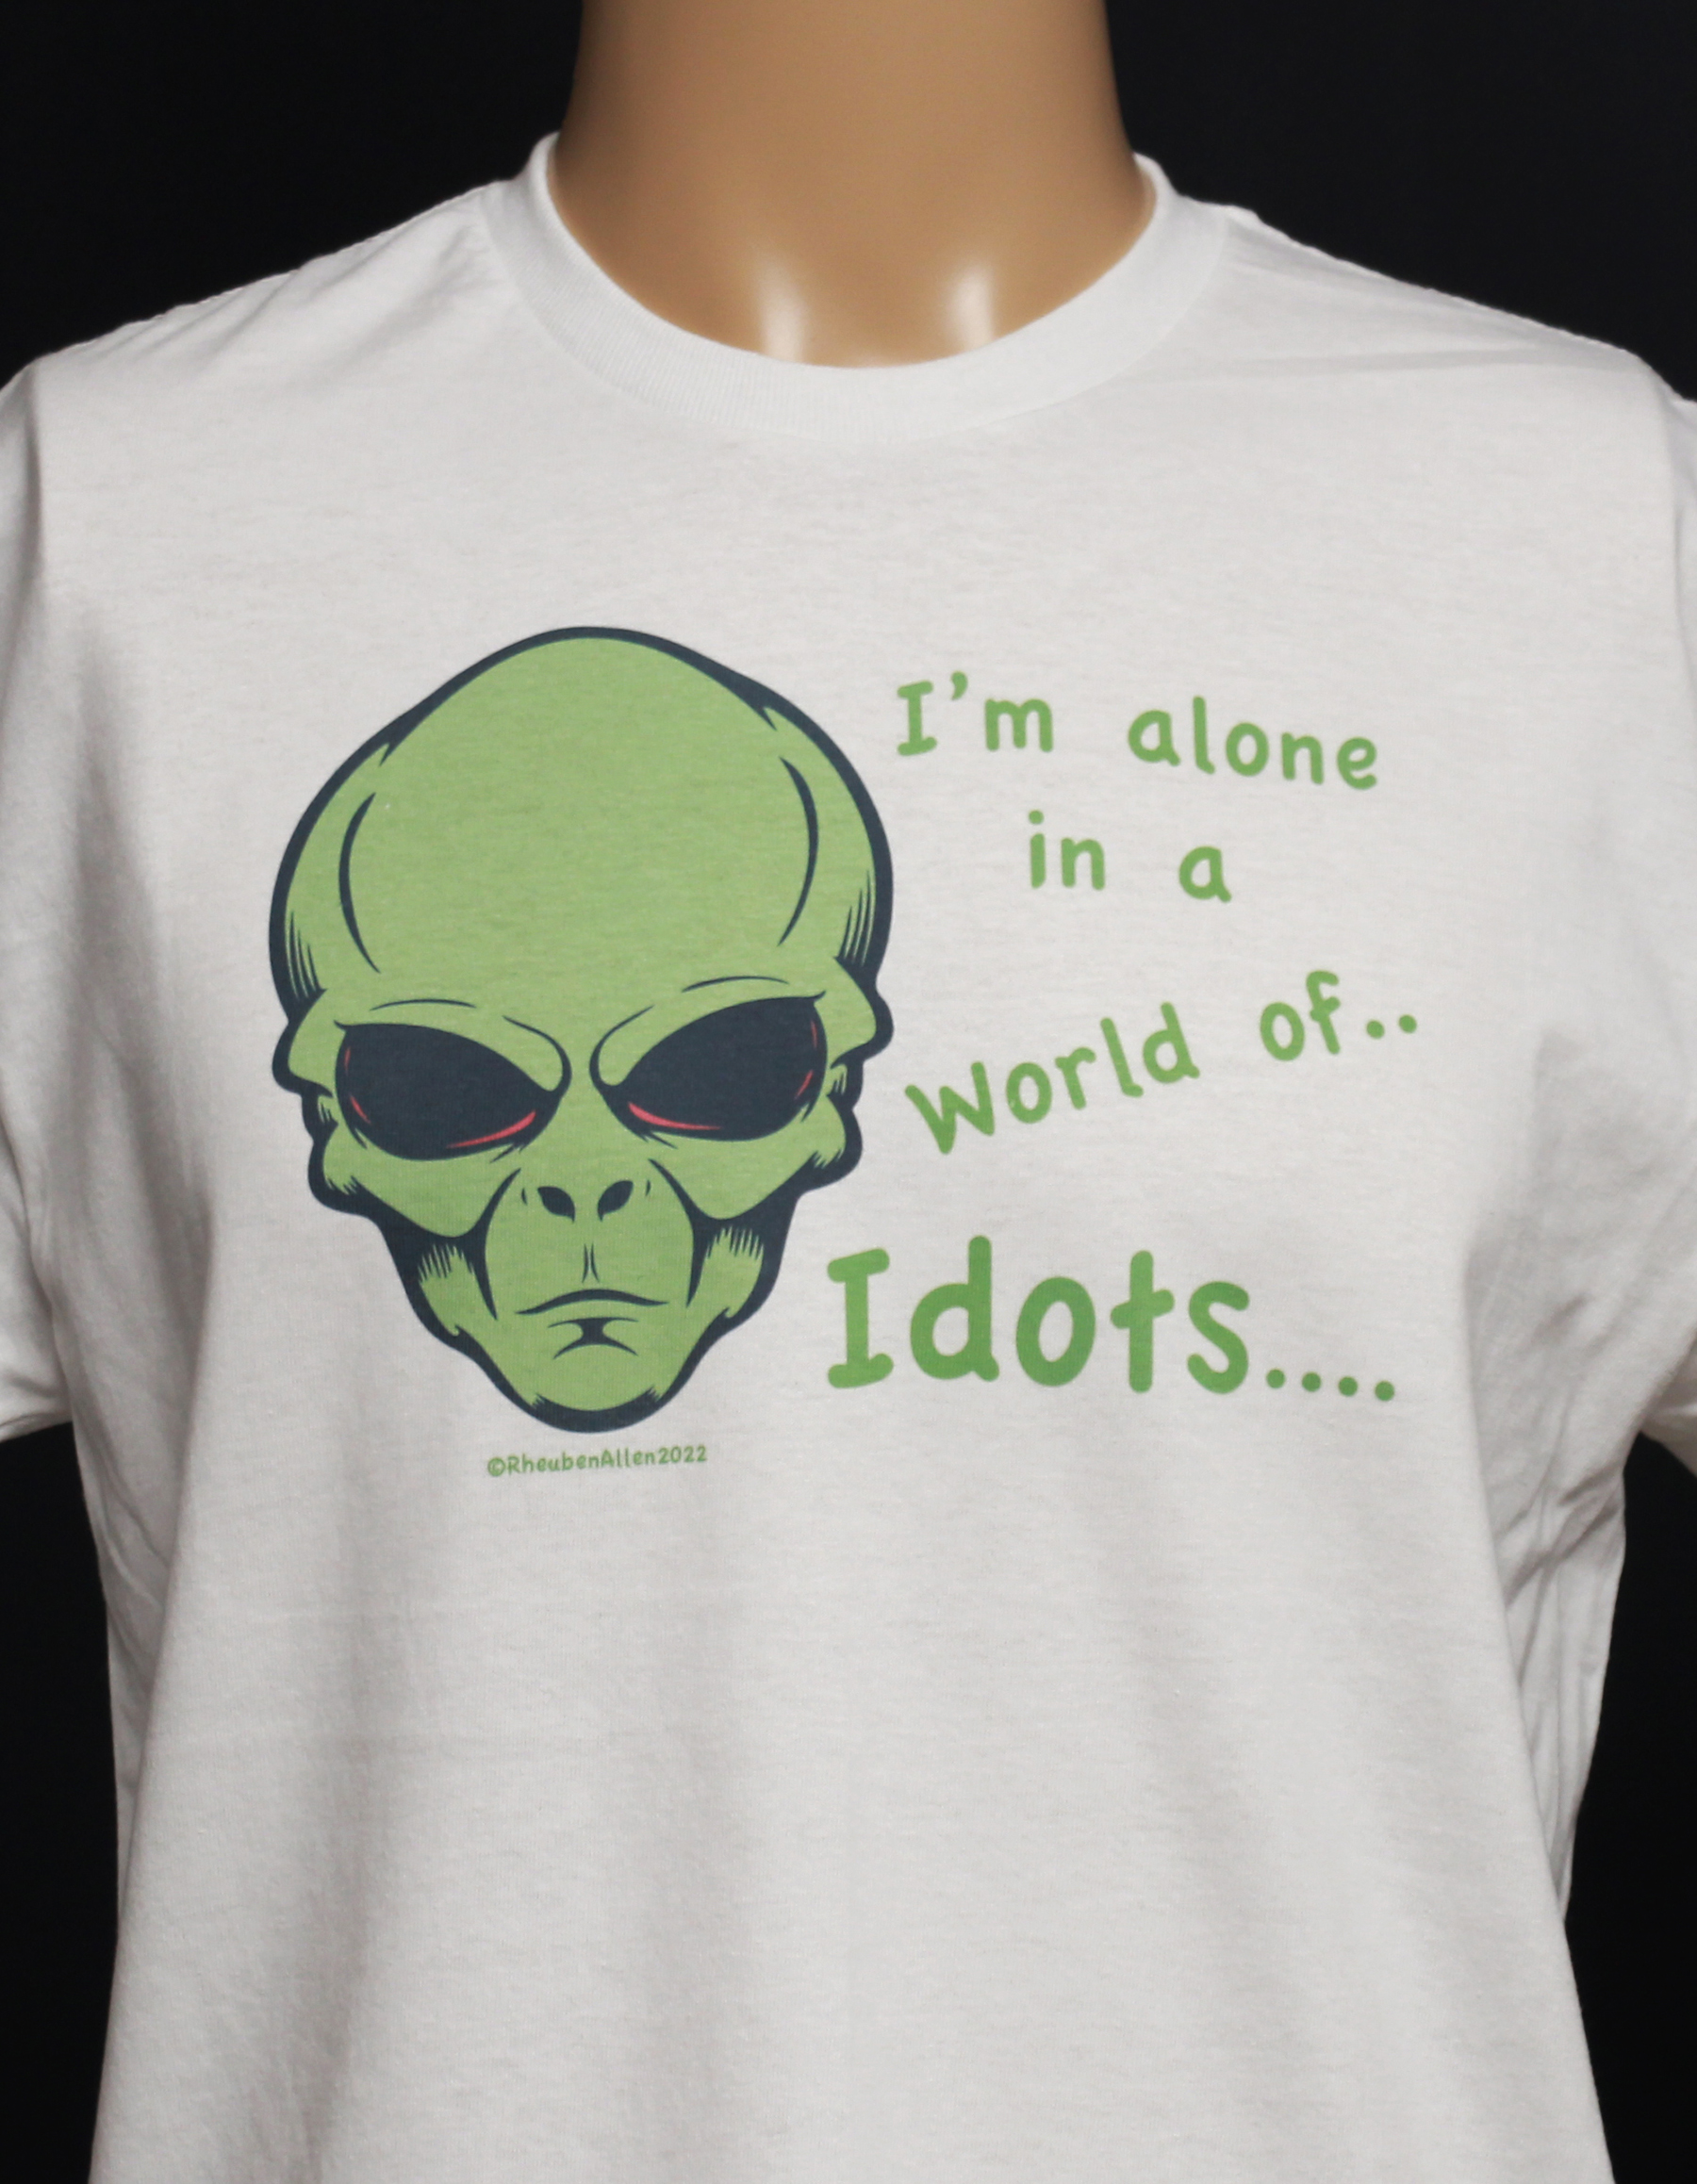 I'm alone in a world of idots...